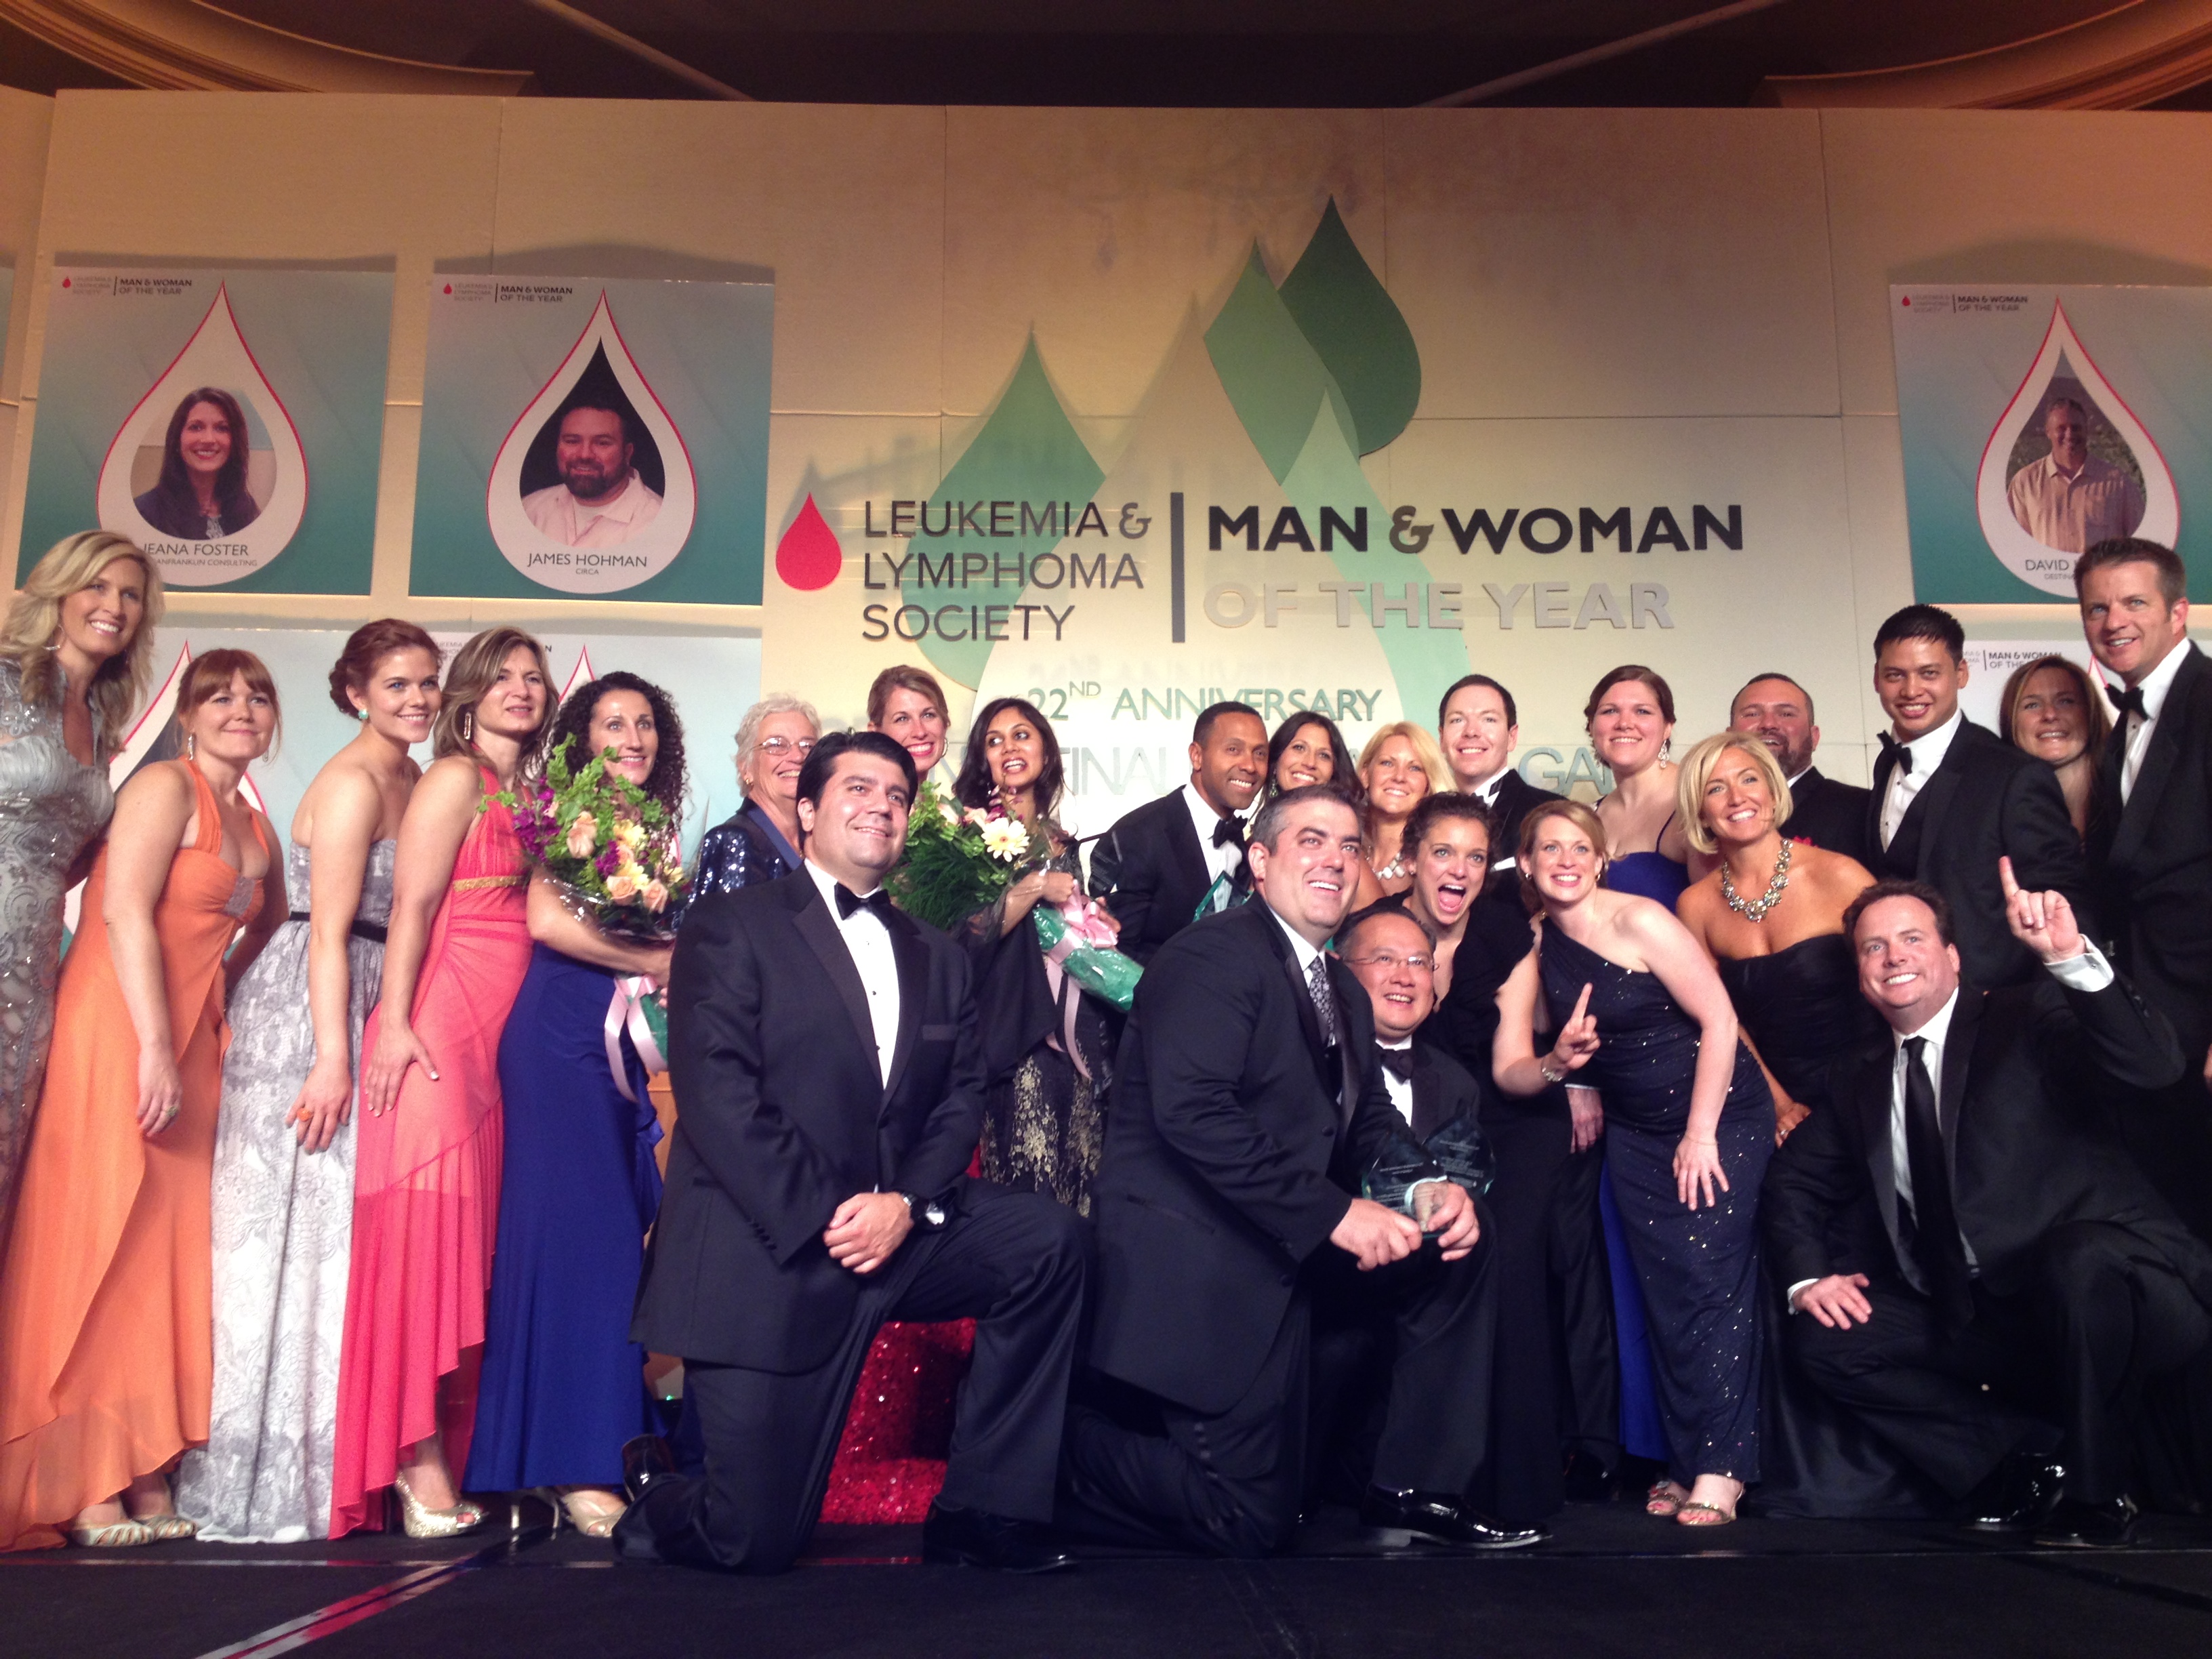 LLS Man & Woman of the Year Names 2013 Winners, Hits Fundraising Record